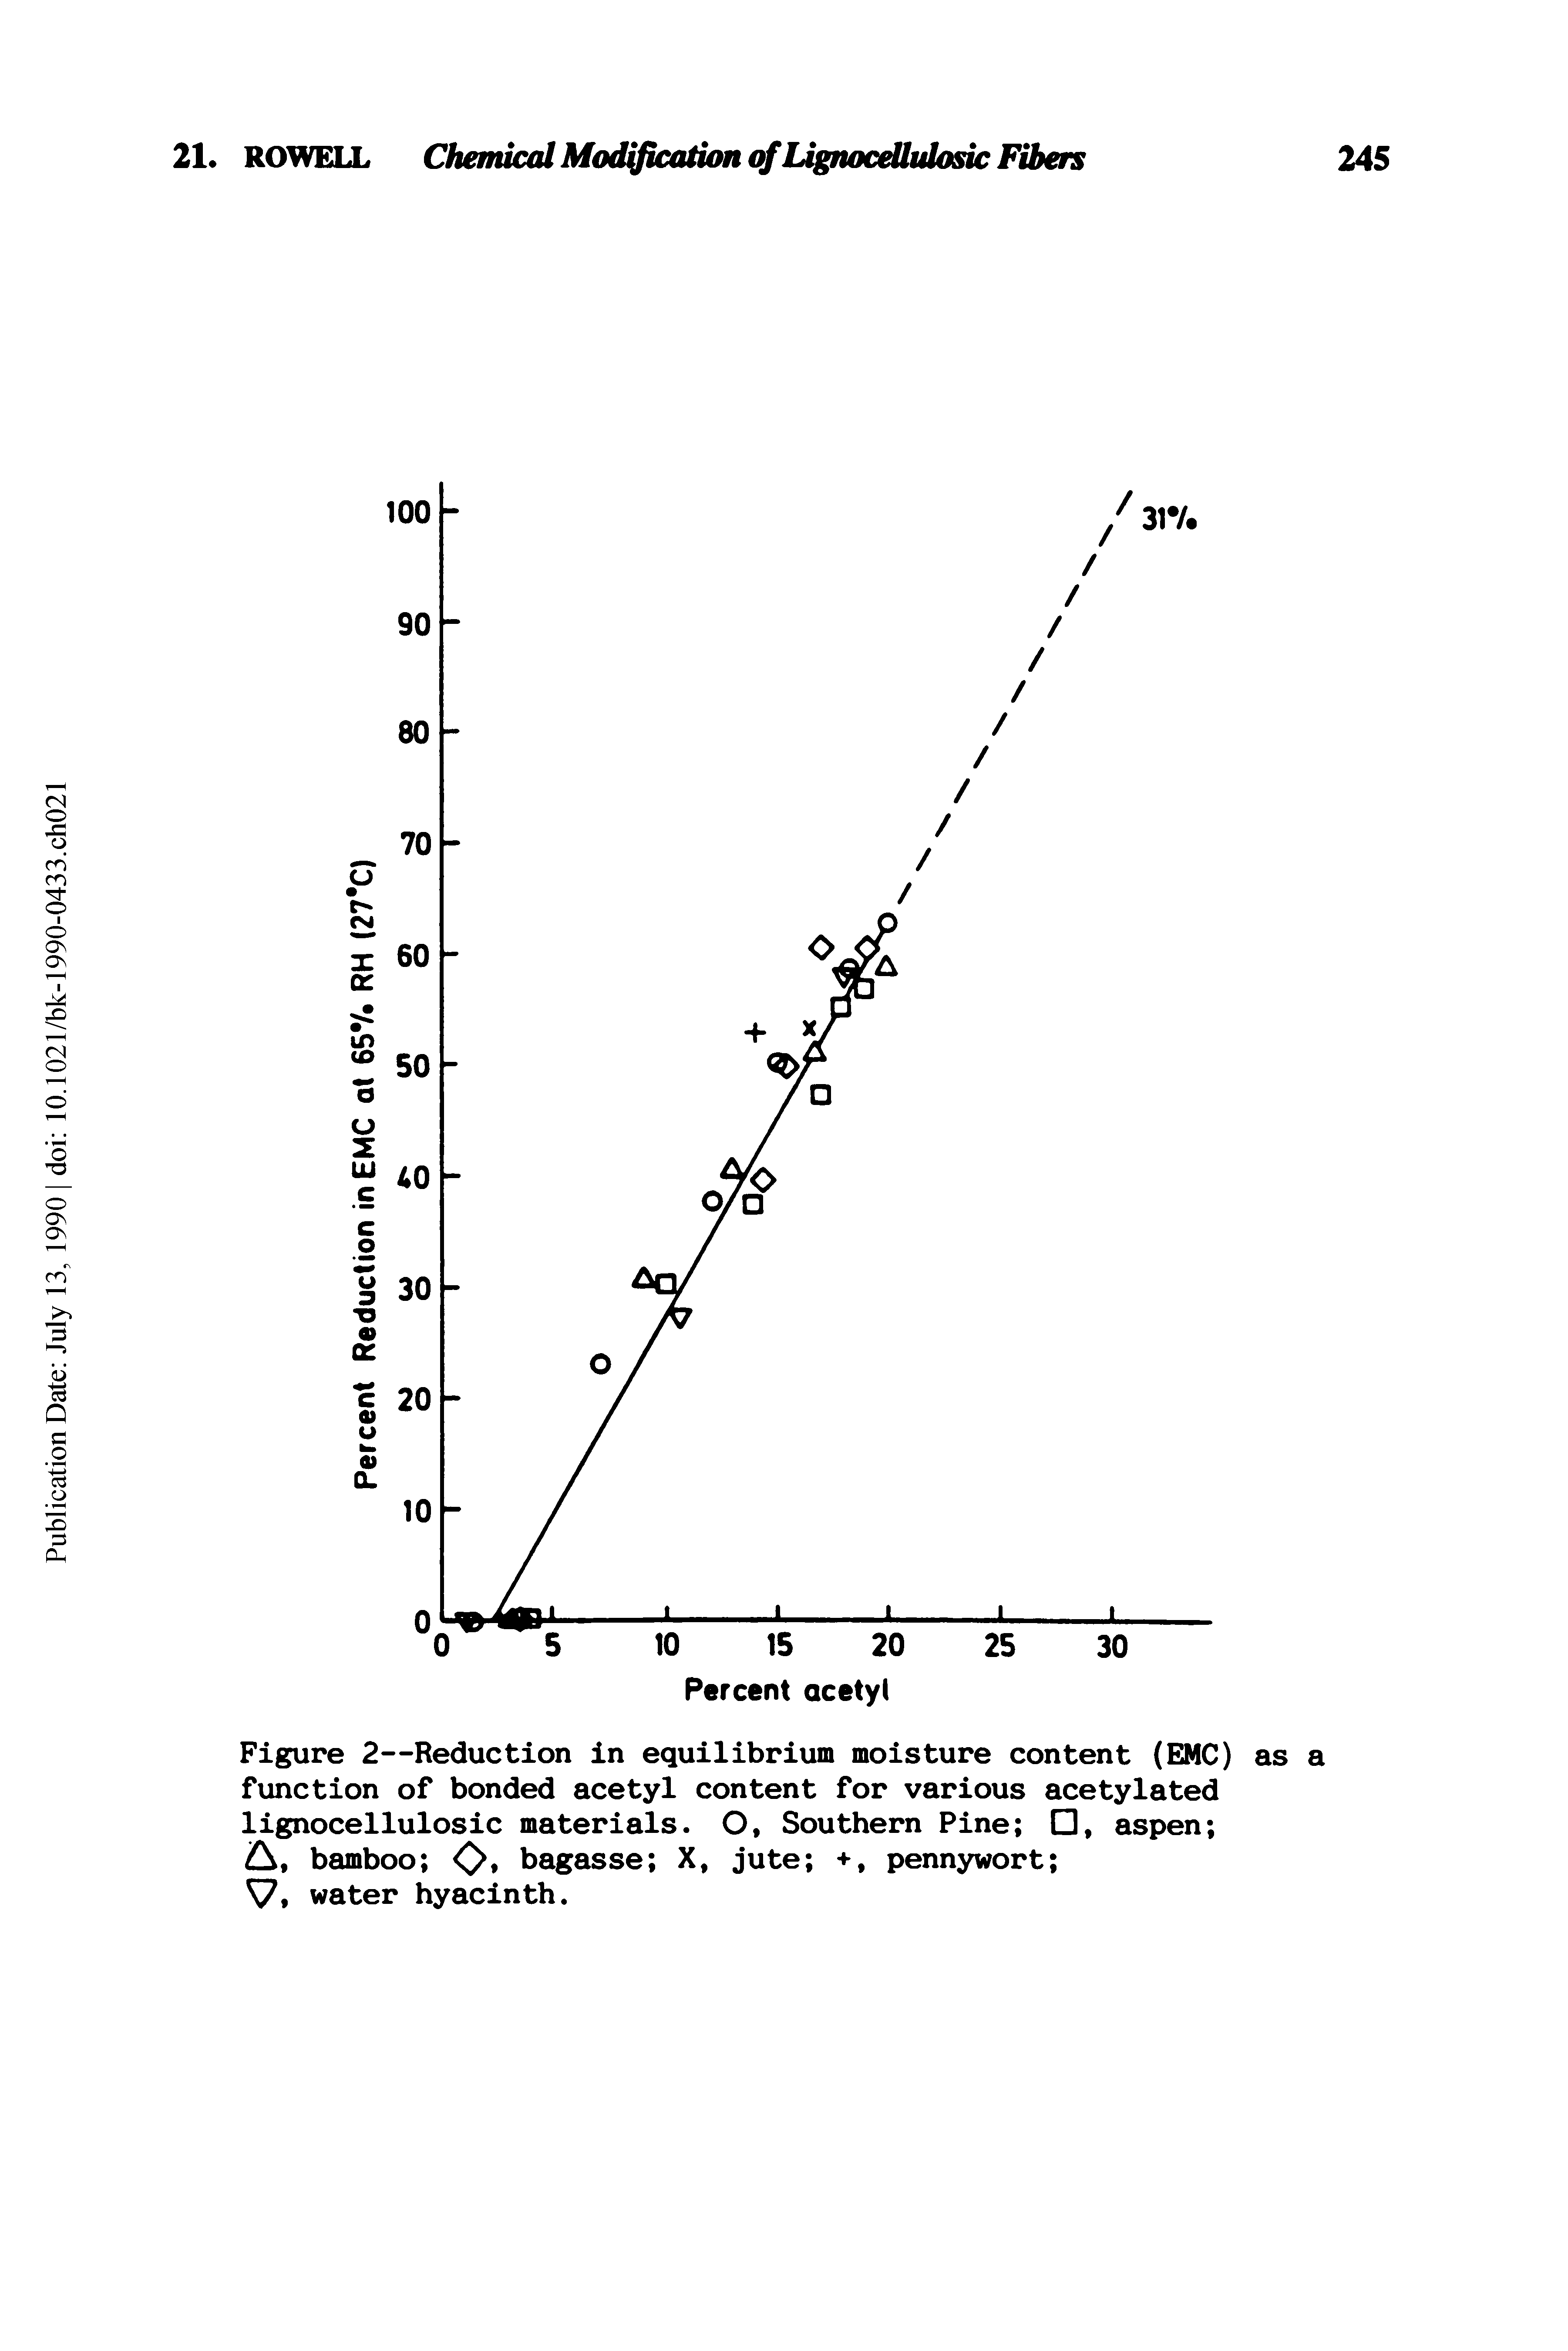 Figure 2—Reduction in equilibrium moisture content (EMC) as a function of bonded acetyl content for various acetylated lignocellulosic materials. O, Southern Pine , aspen ...